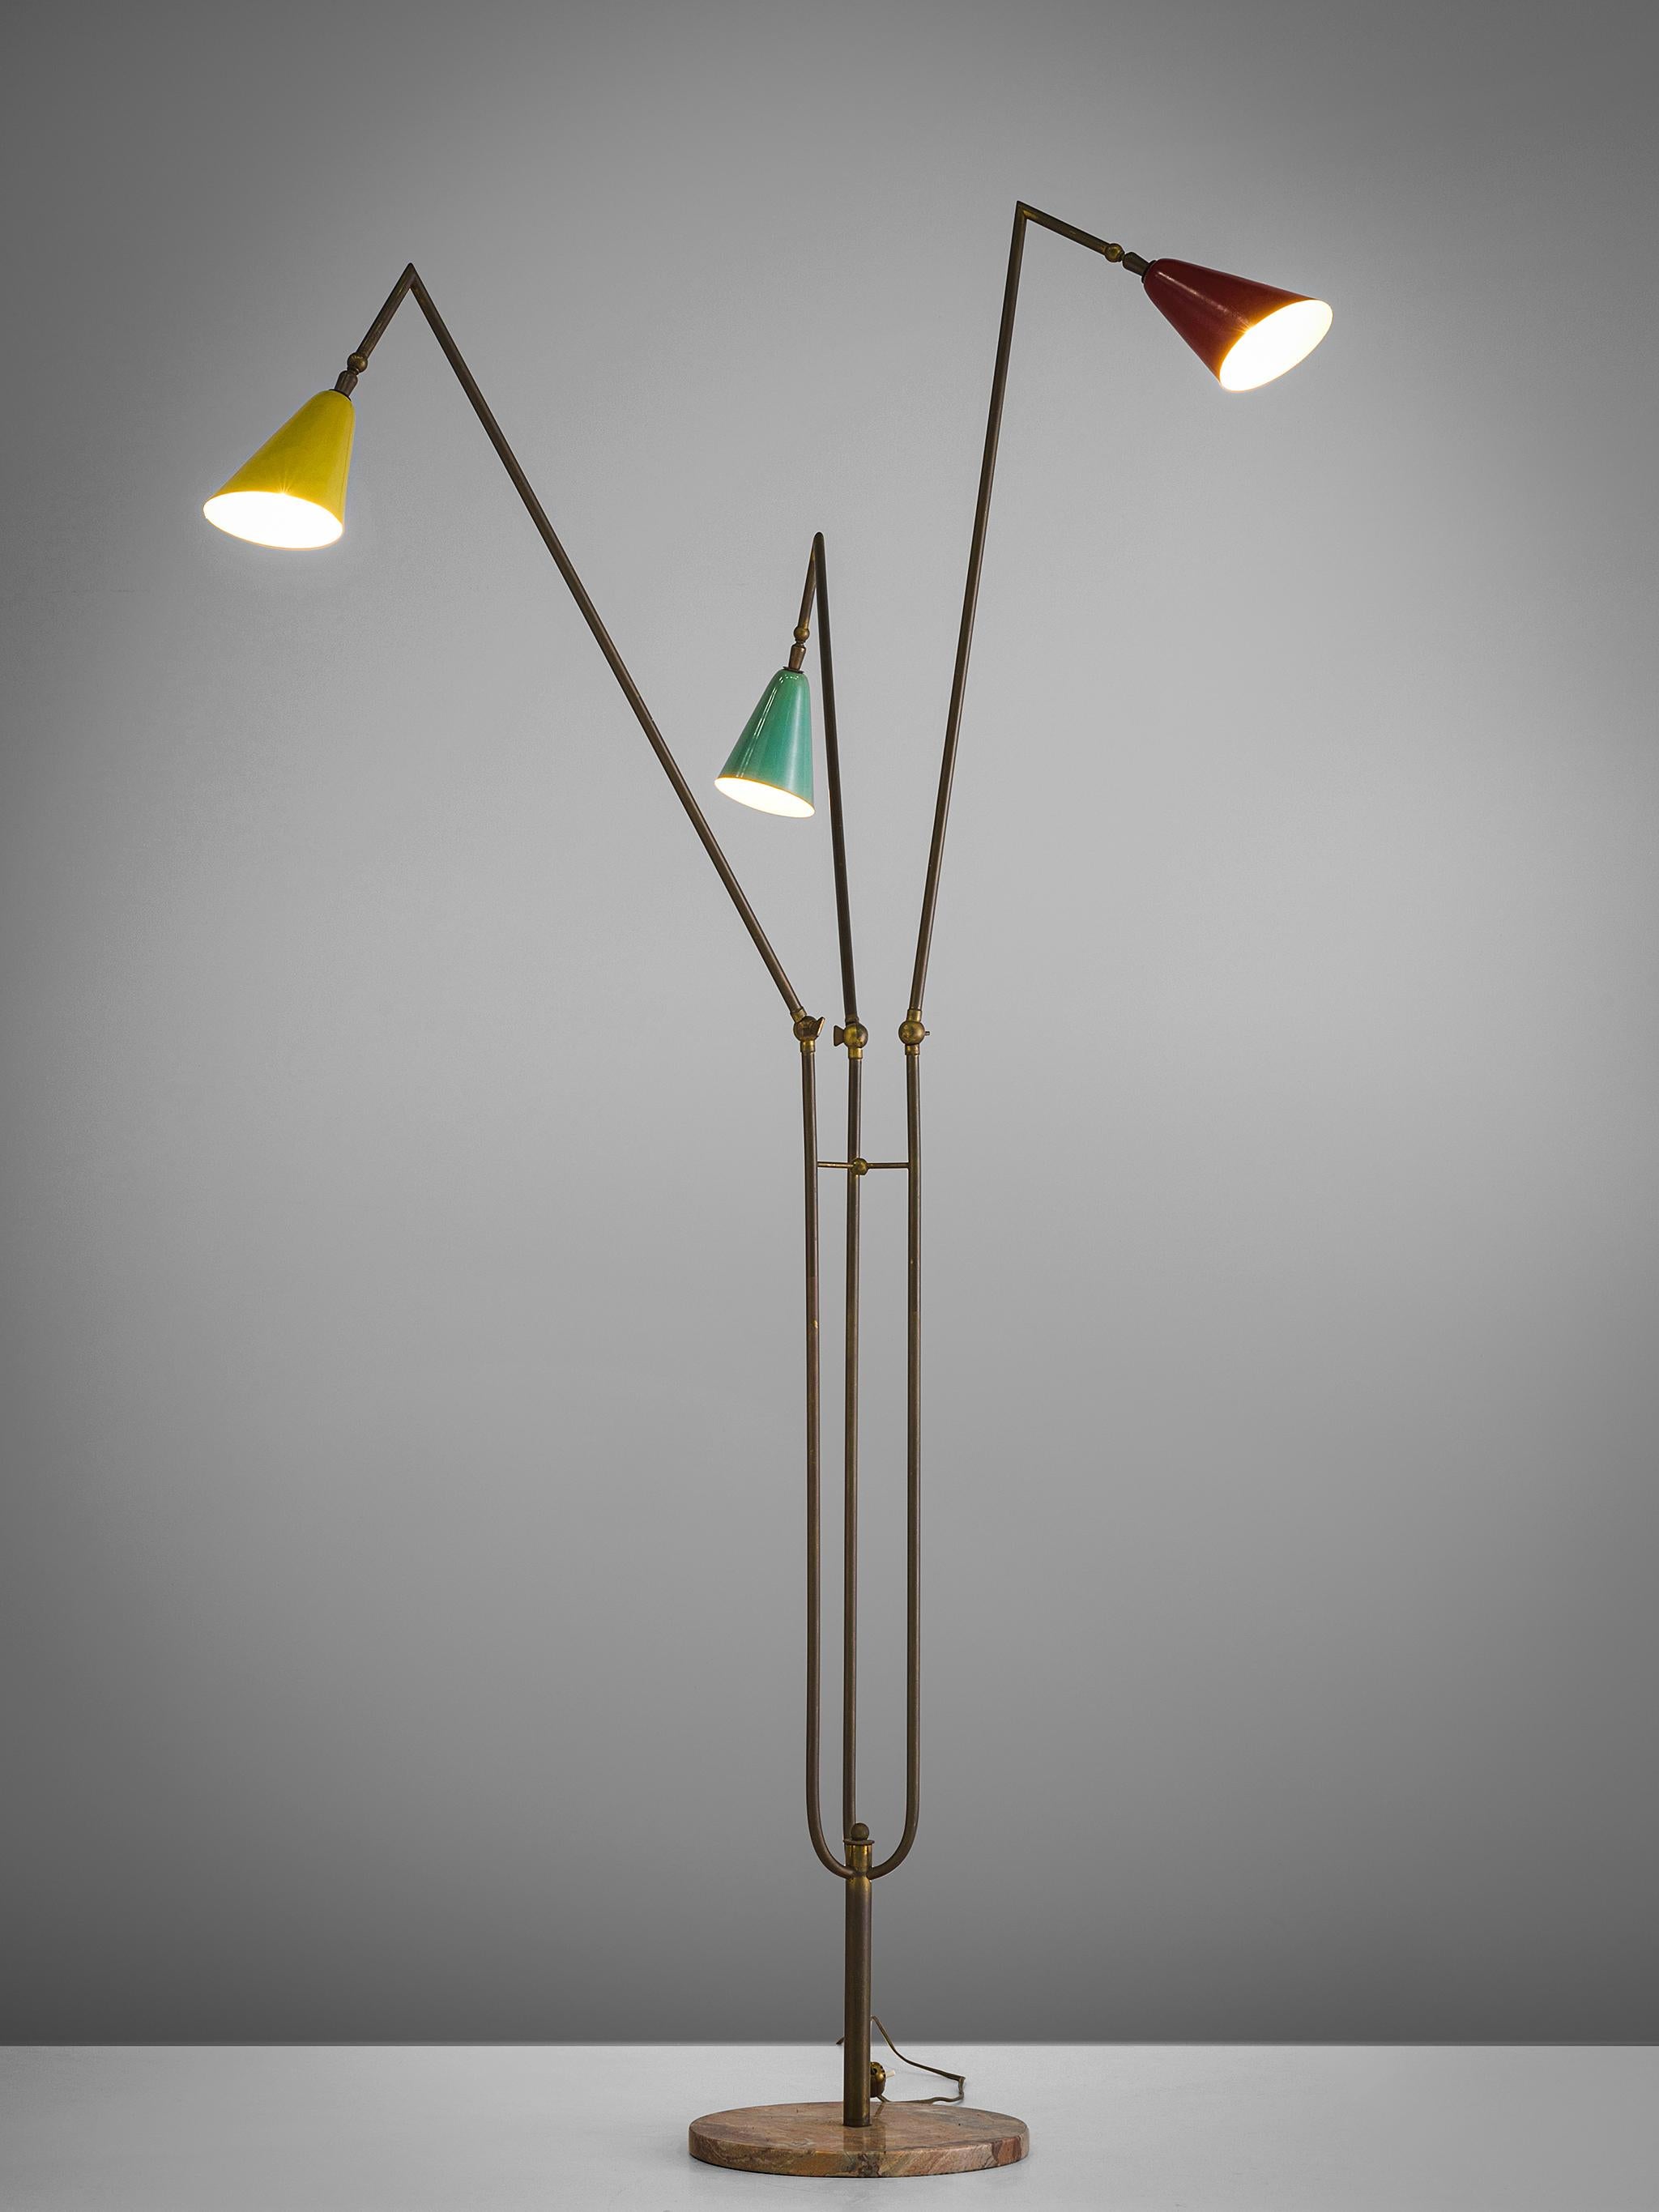 Floor lamp with colored shades in green, yellow and red metal, brass and marble, Italy, 1950s.

This floor lamp is built up of one pedestal pink marble foot from which one brass stem arises that sprout into three arms. The arms each end in a metal